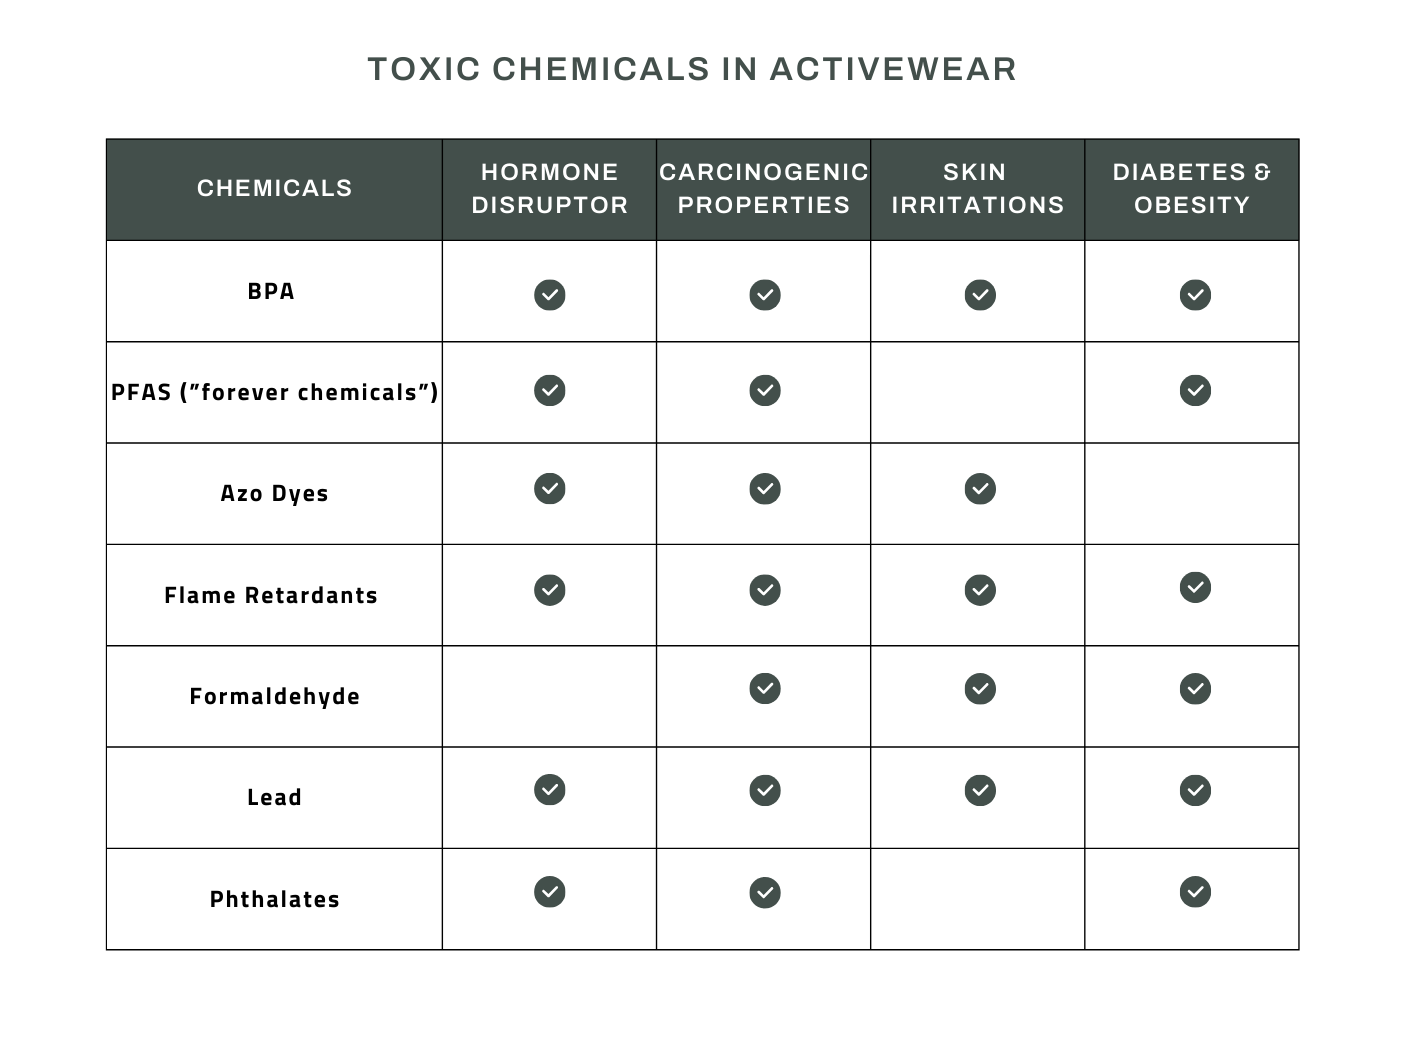 Table outlining toxins in clothing and health impacts.